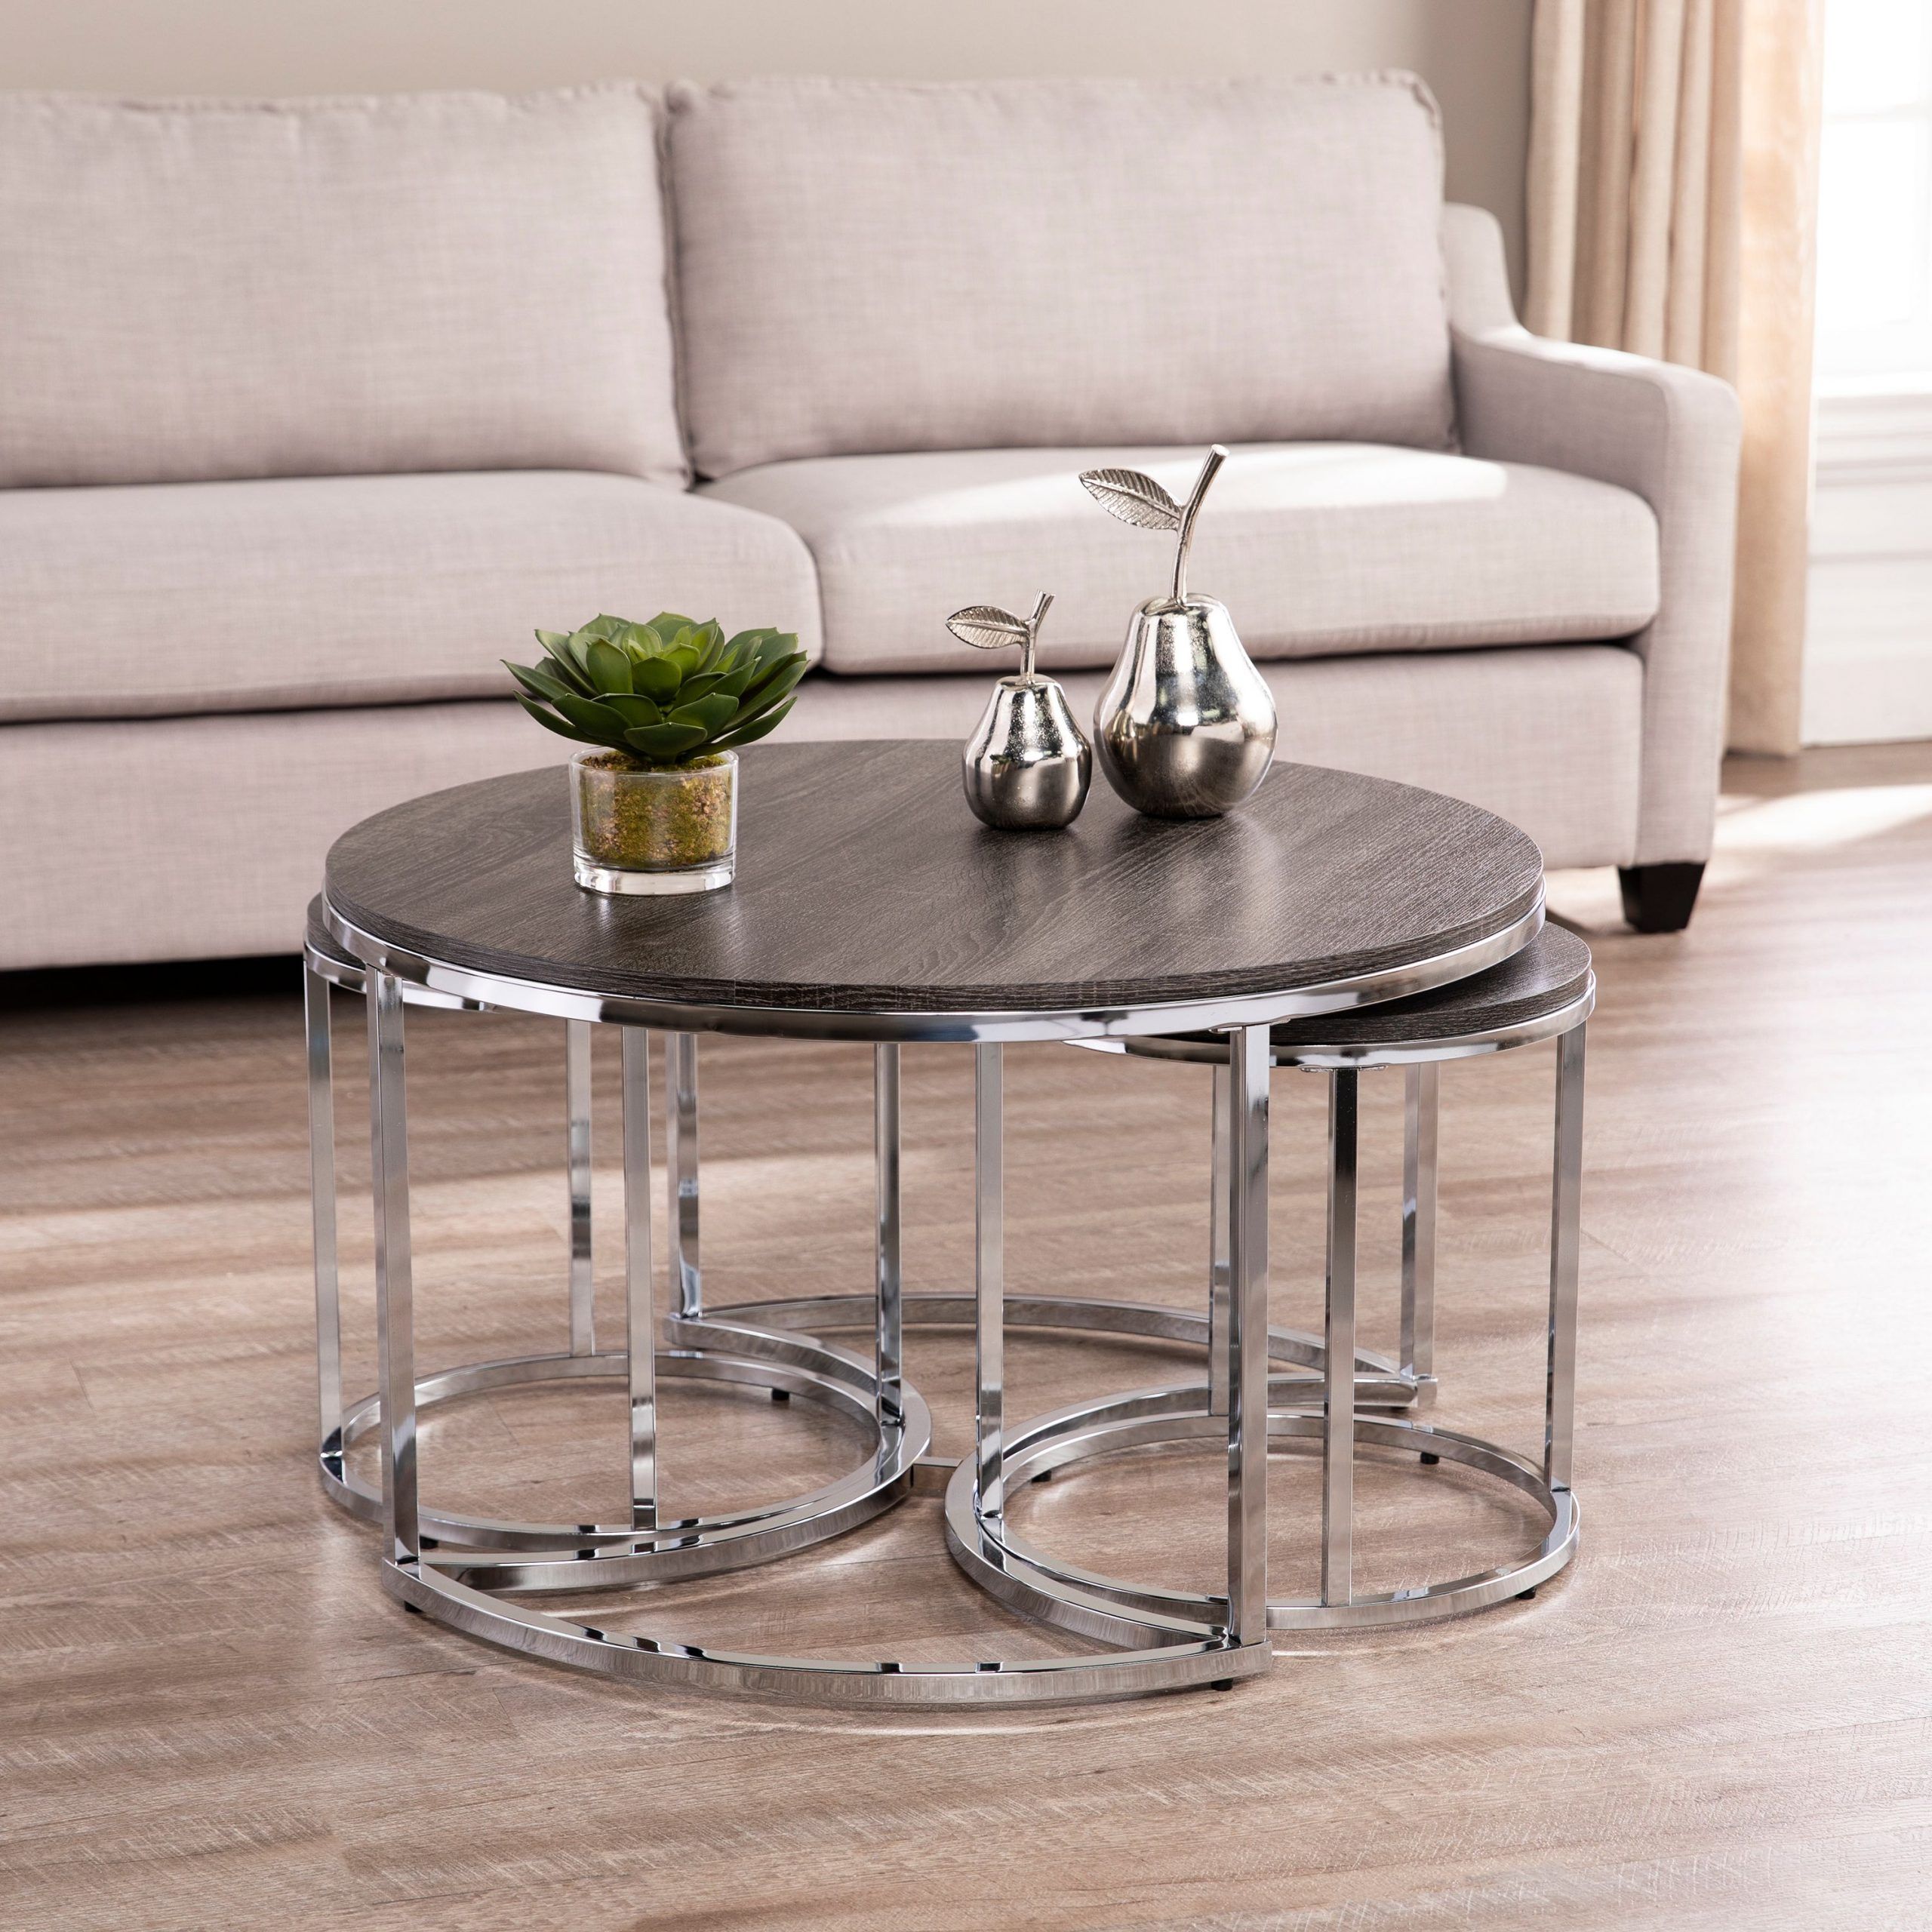 Lokyle Round Nesting Coffee Tables – 3pc Set, Glam, Silver Pertaining To Best And Newest 2 Piece Round Coffee Tables Set (View 9 of 20)